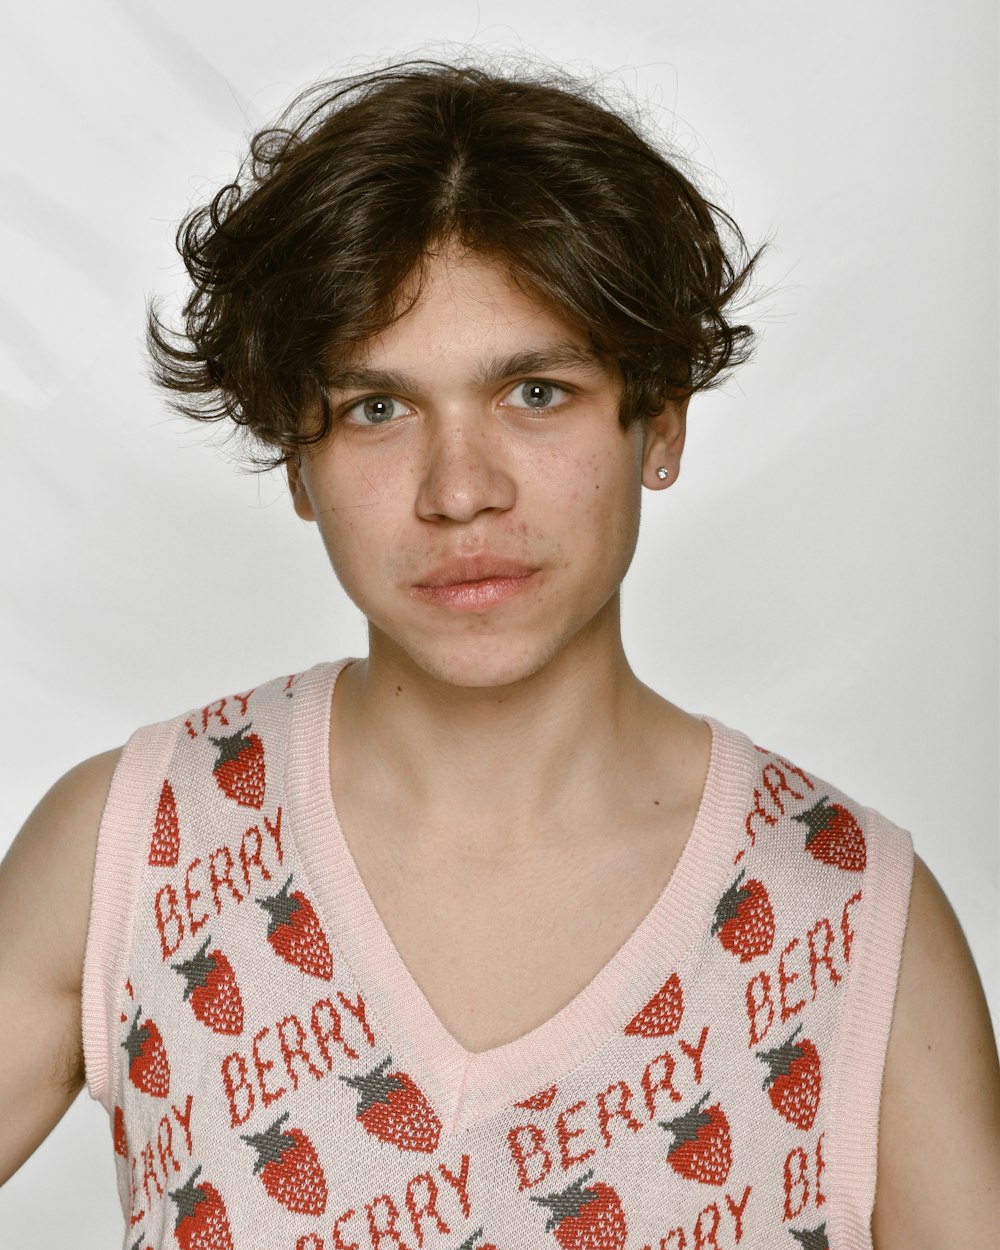 a young man wearing a pink shirt with strawberries on it